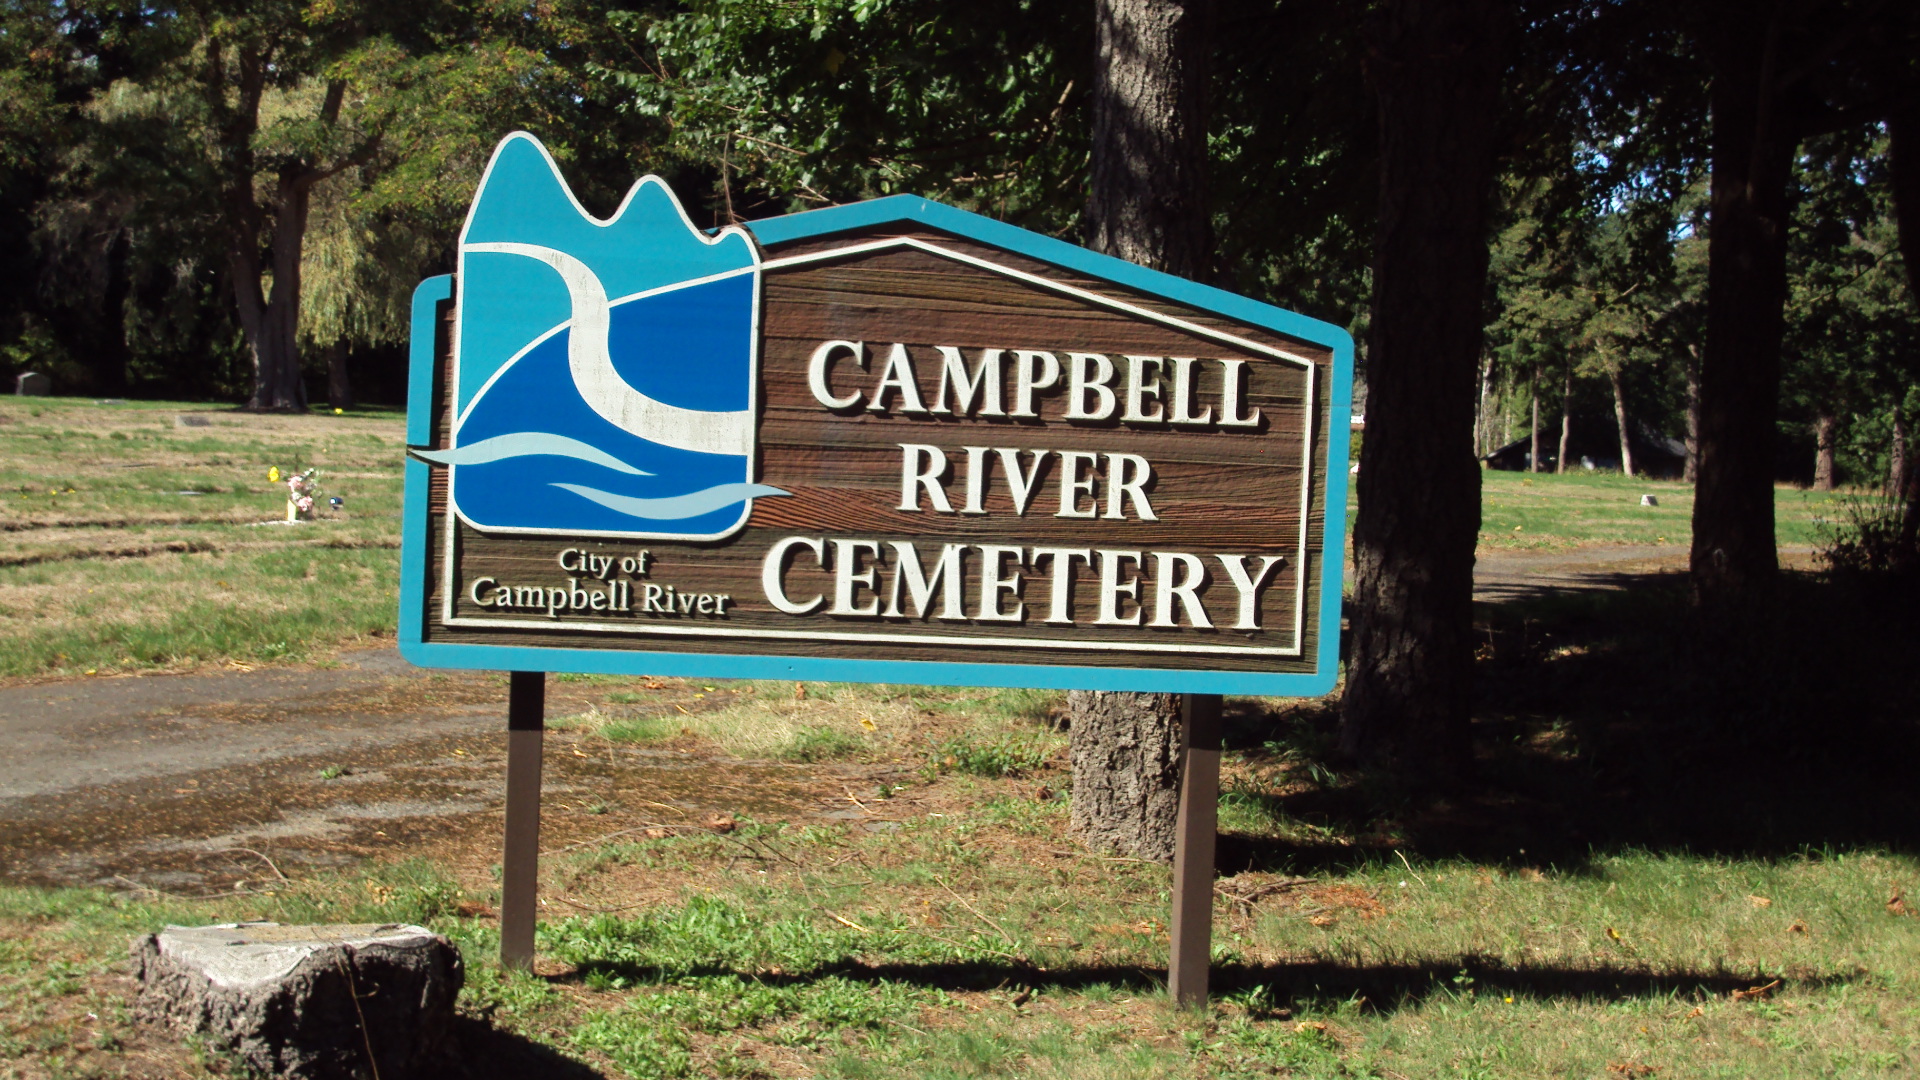 Campbell River Cemetery